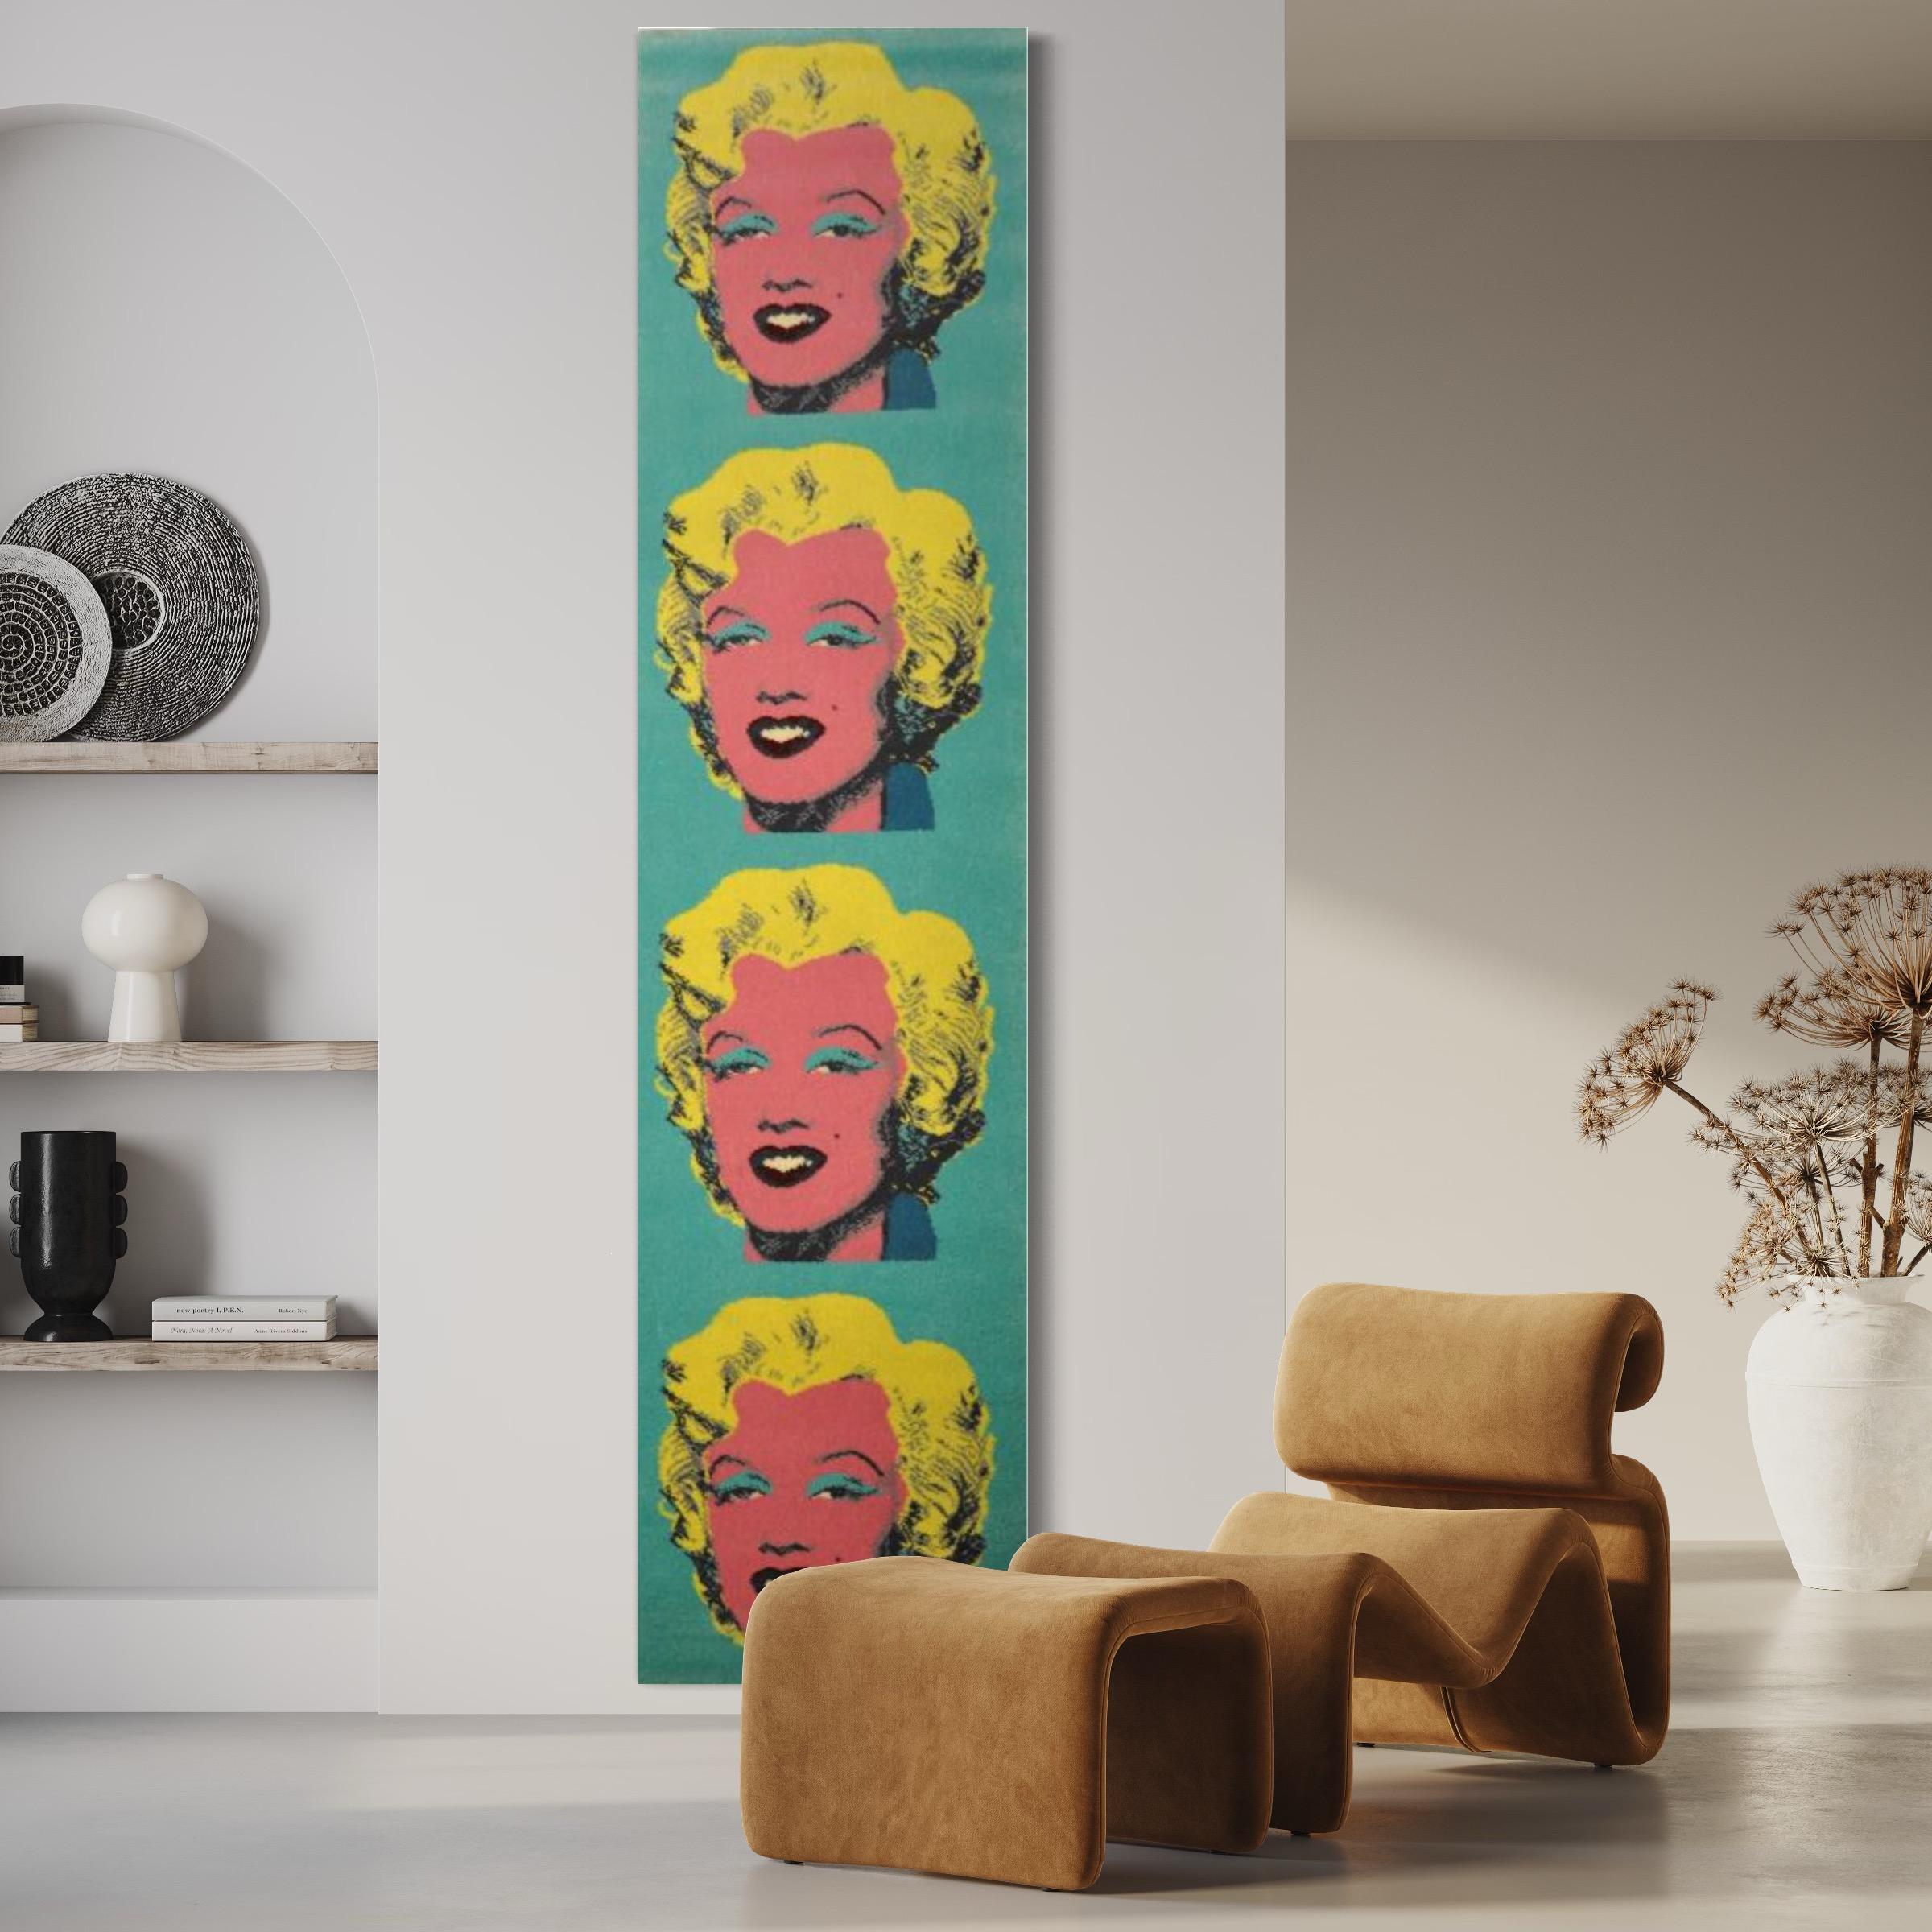 Andy Warhol
Marilyn in Blue, 1964/1997
Hand woven tapestry
Woven signature, publisher's label on verso
340 x 80 cm
Published by Ege Axminster, Denmark

Certificate of authenticity on label
Edition of 20
In excellent condition 
The artwork is offered